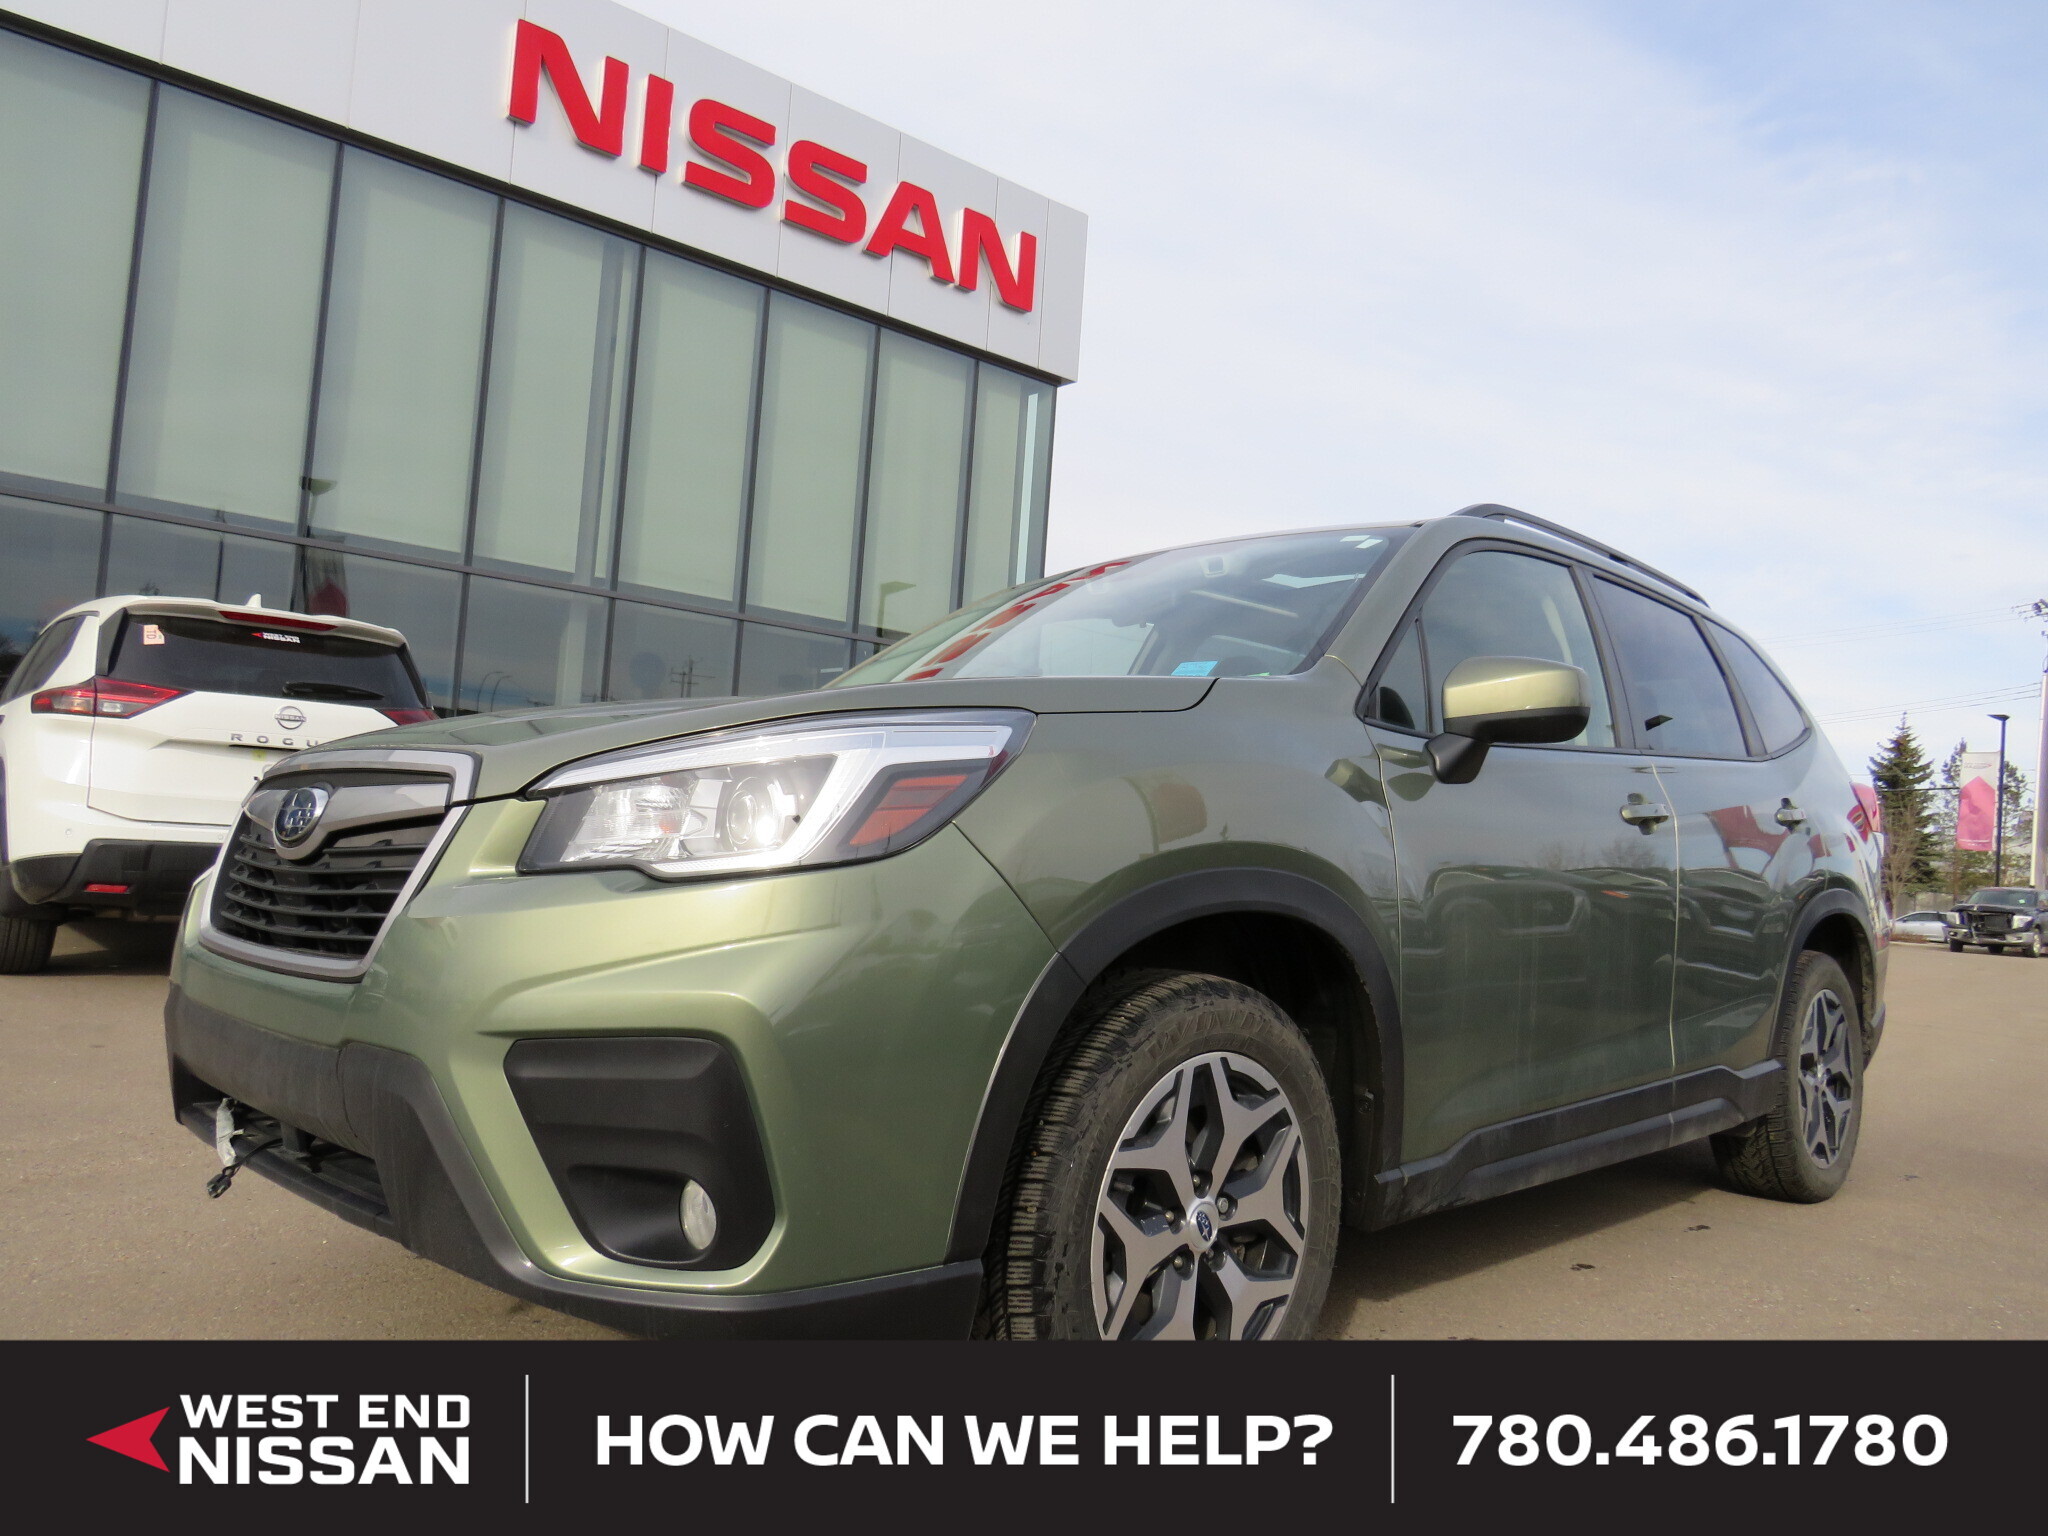 2020 Subaru Forester TOURING AWD - EXCELLENT SHAPE!